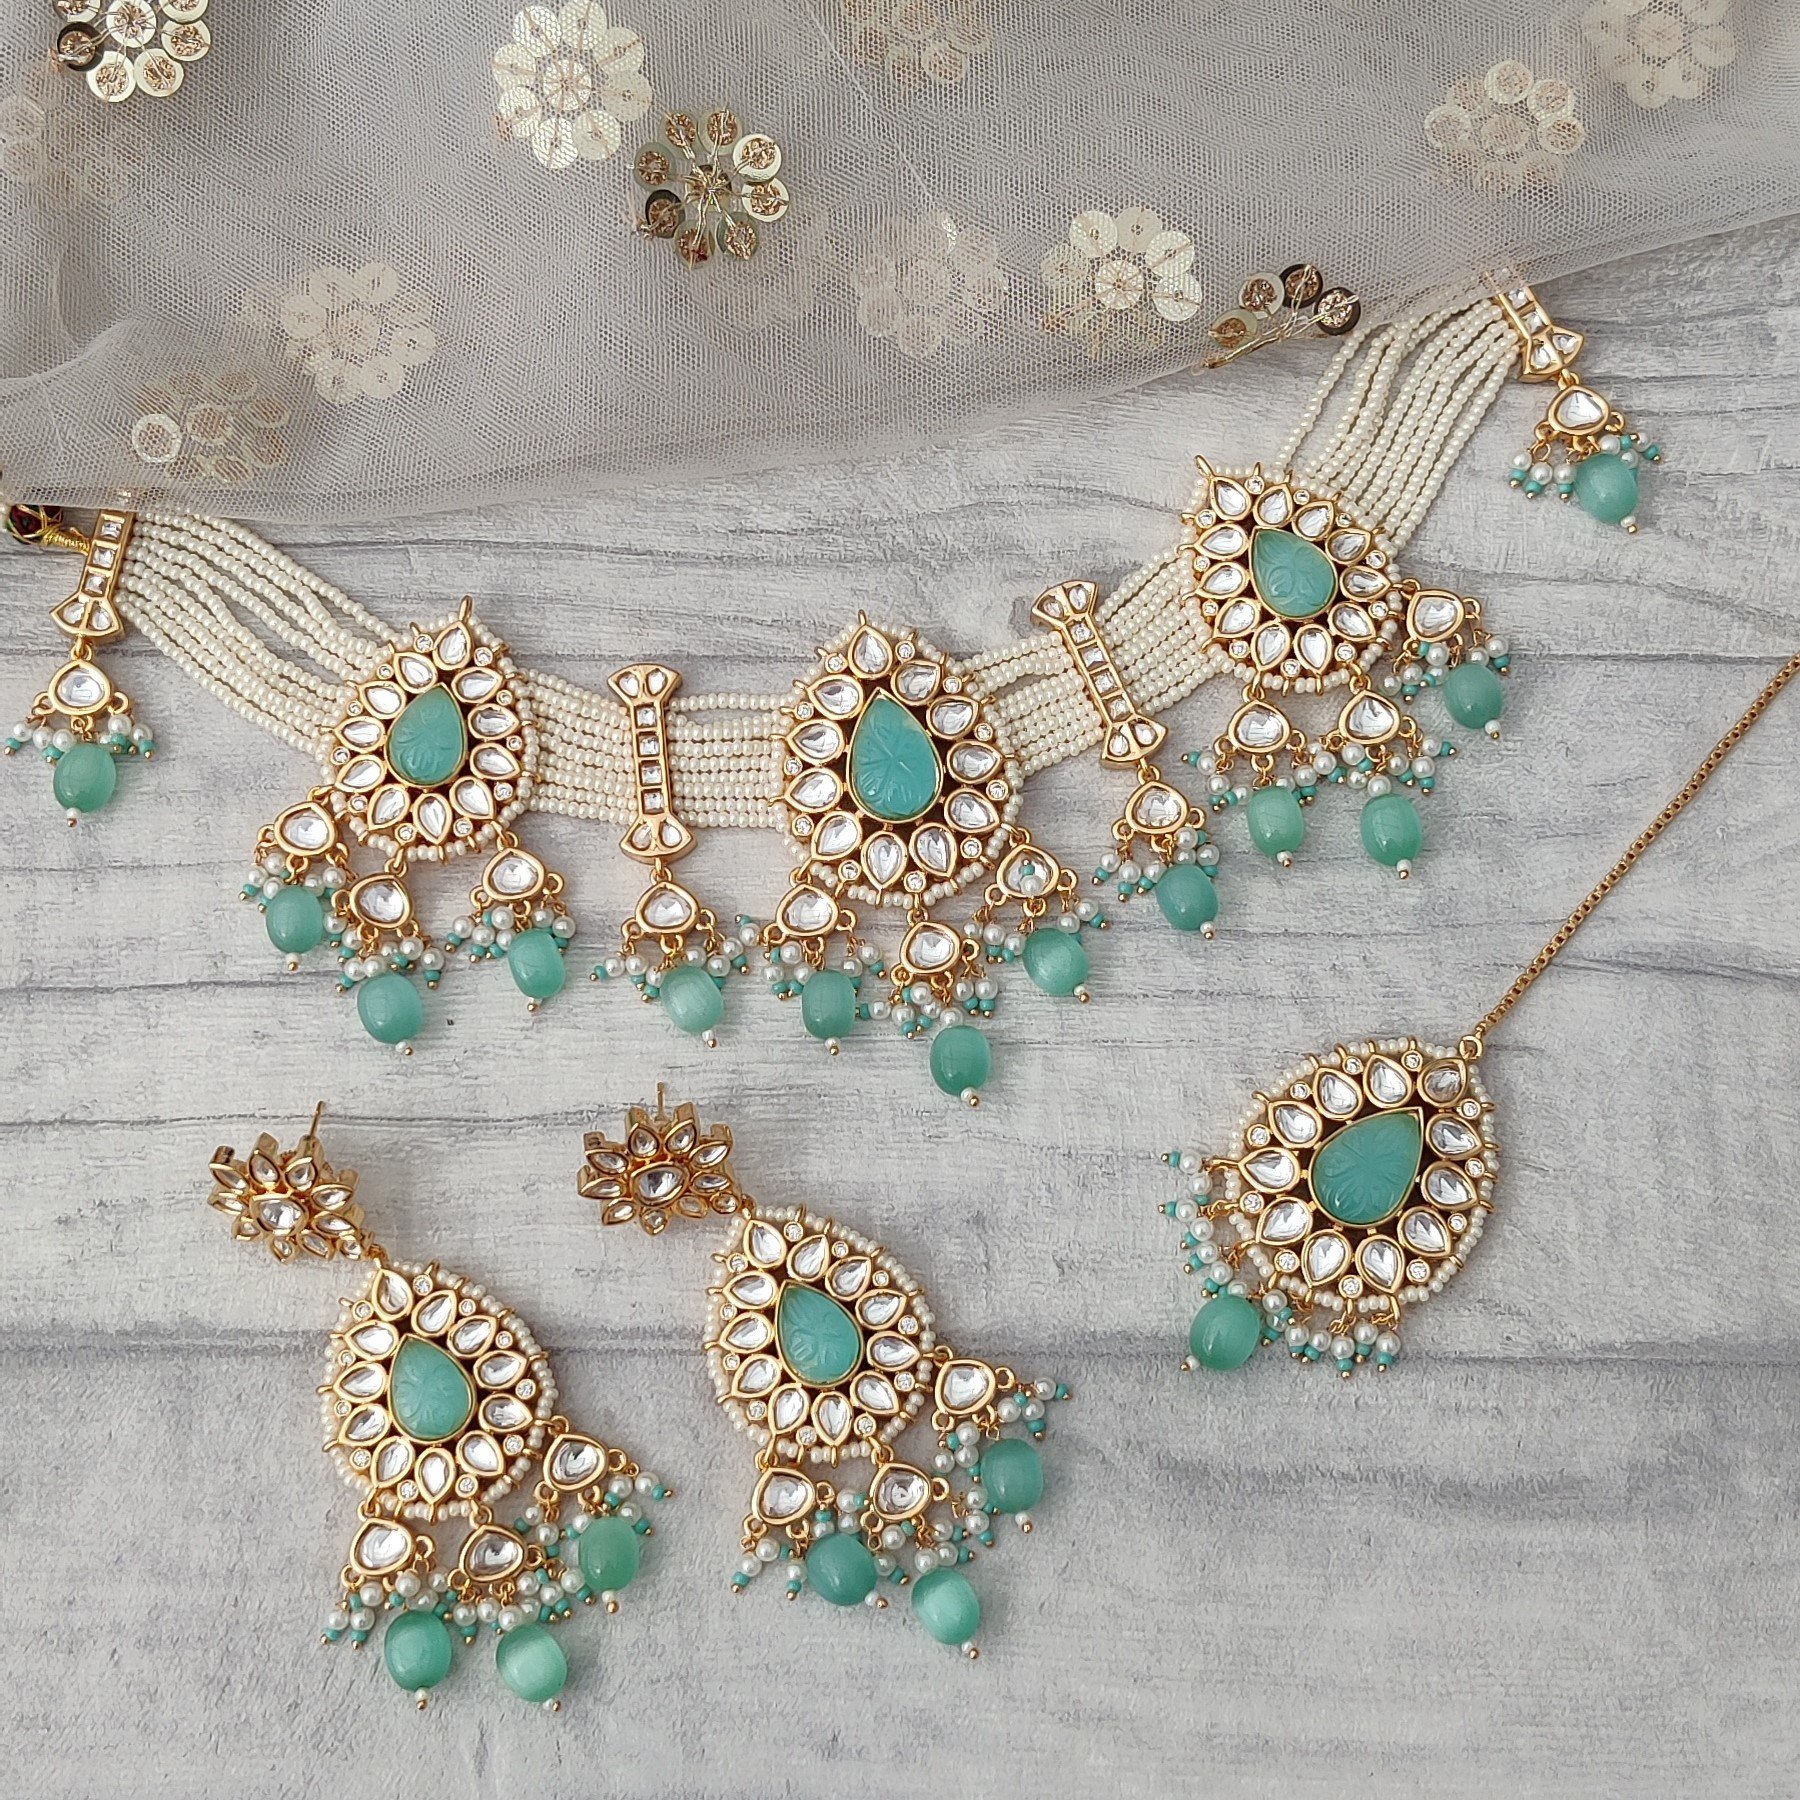 Kundan Necklace Set in Silver And Sea Green Colour By Pink Box Jewellery -  Pink Box Jewellery